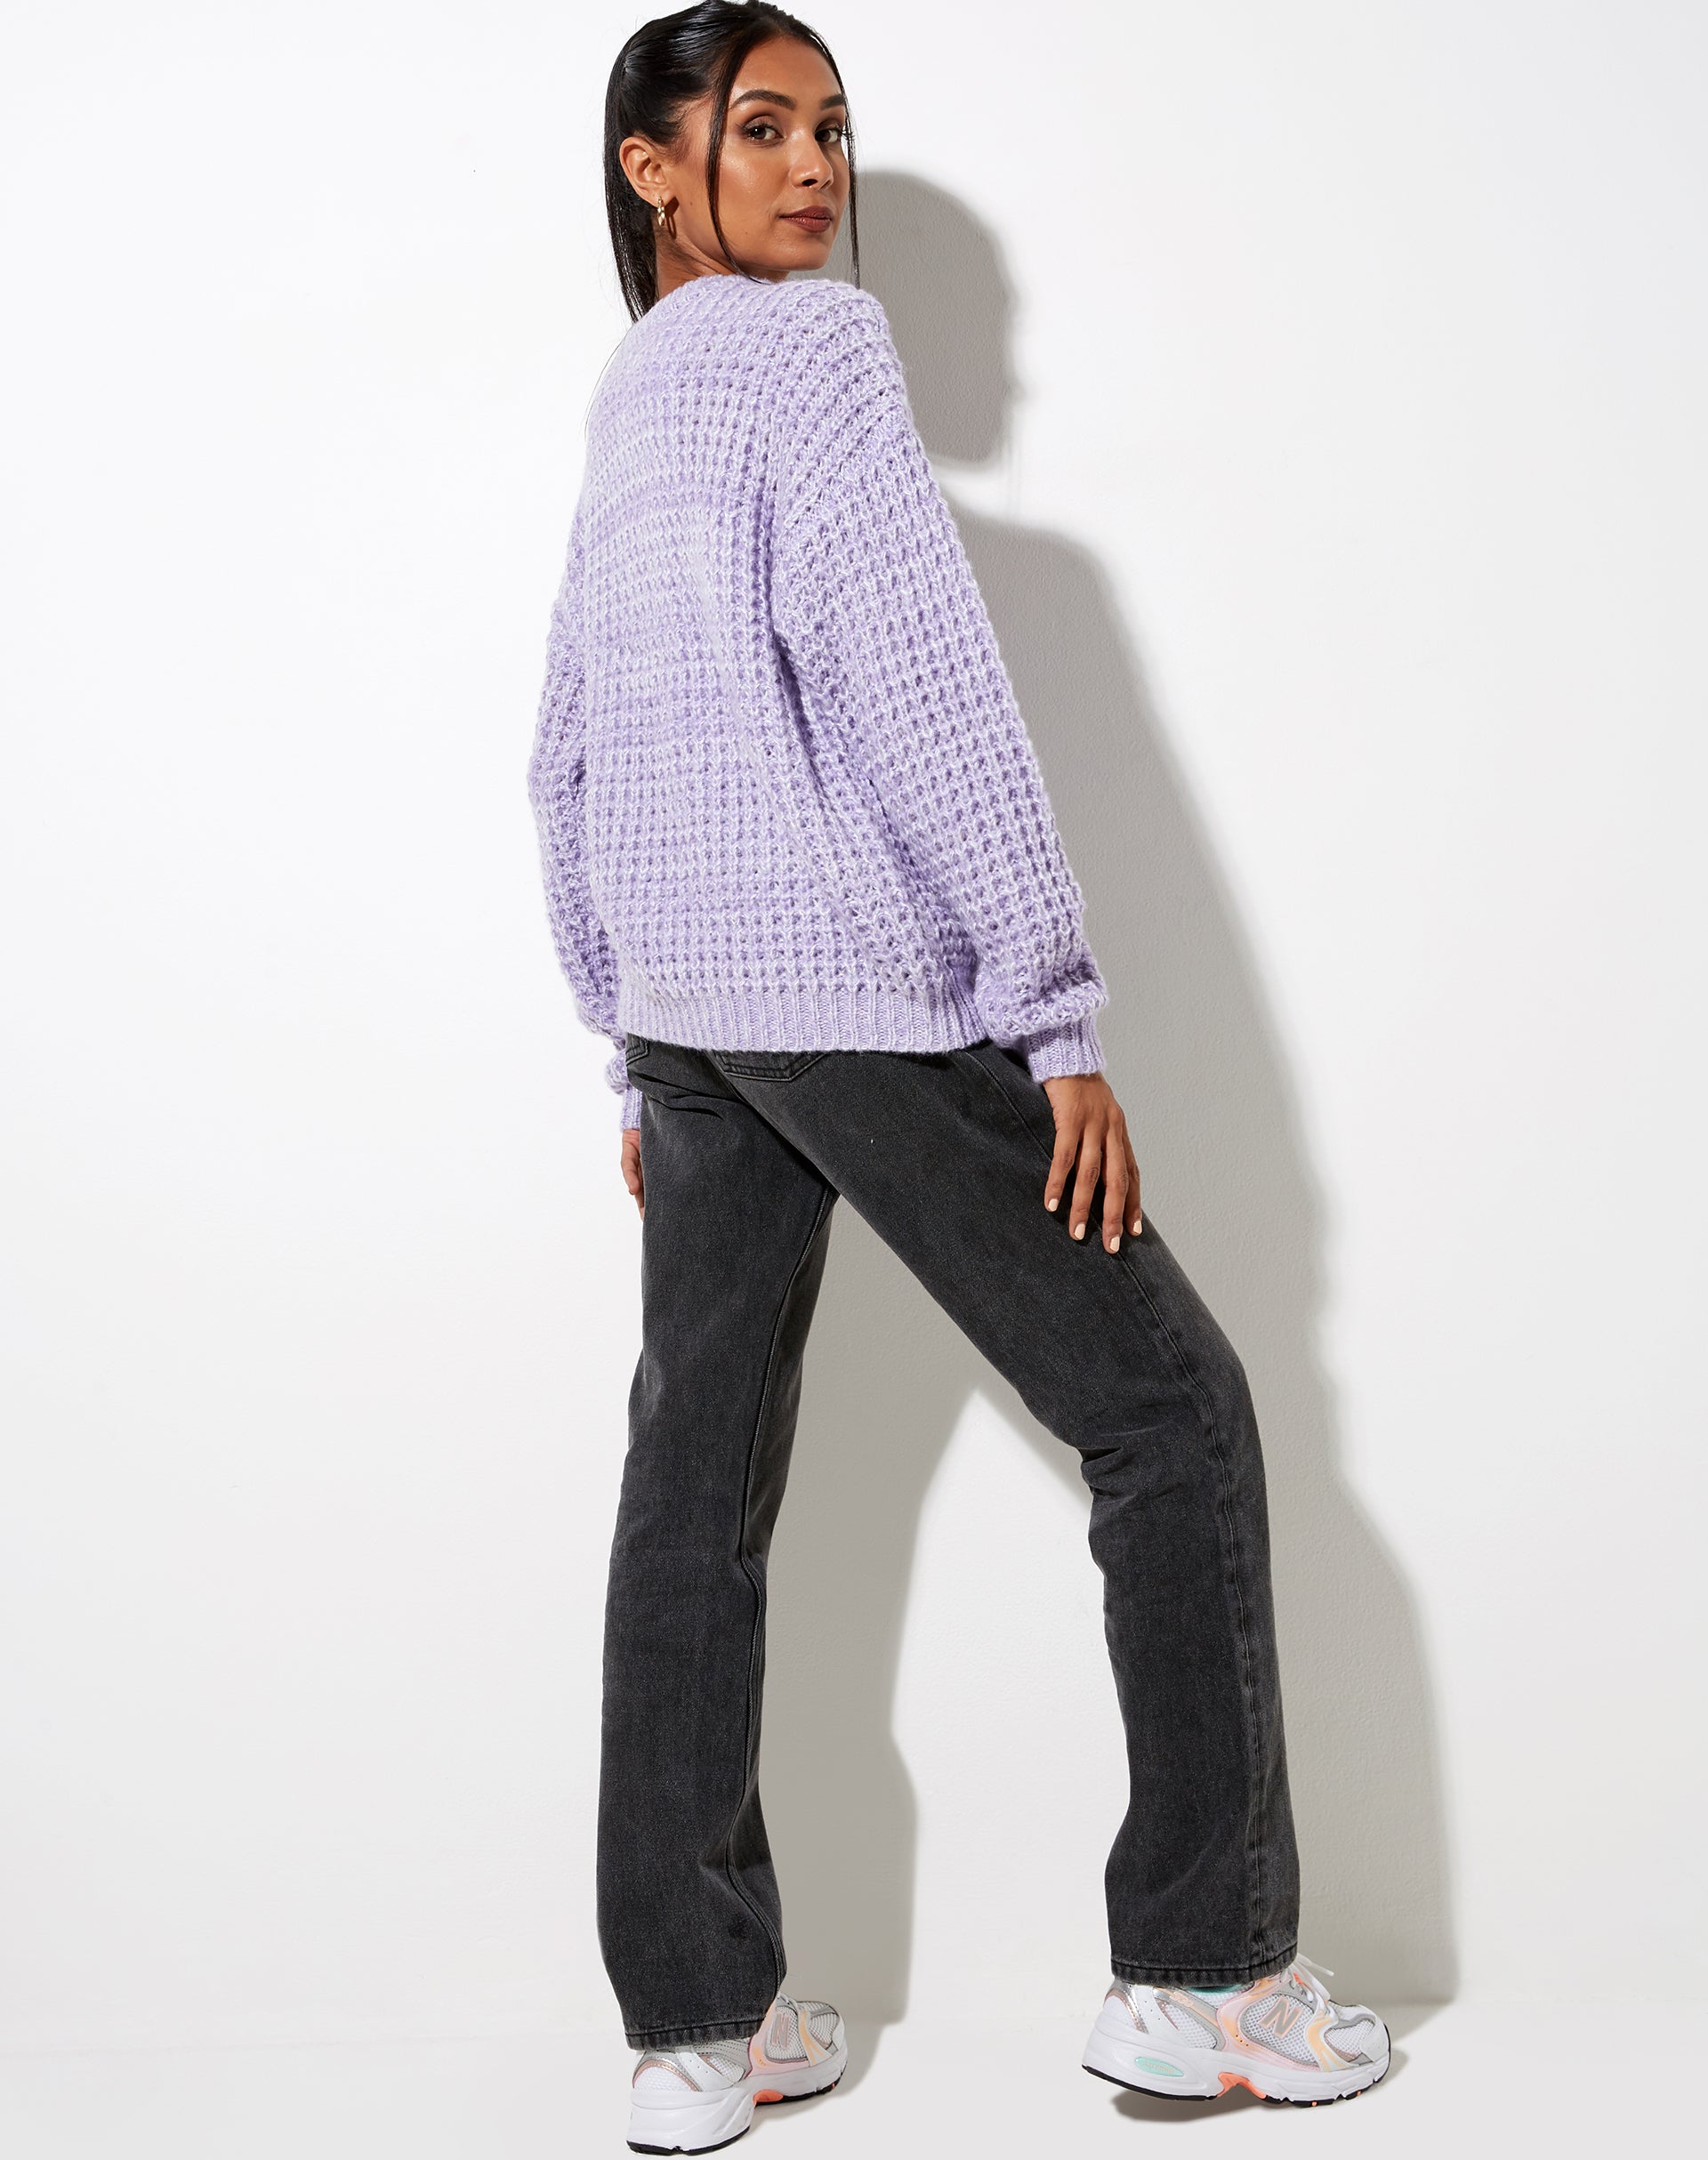 Image of Caribou Jumper in Chunky Knit Lilac and White